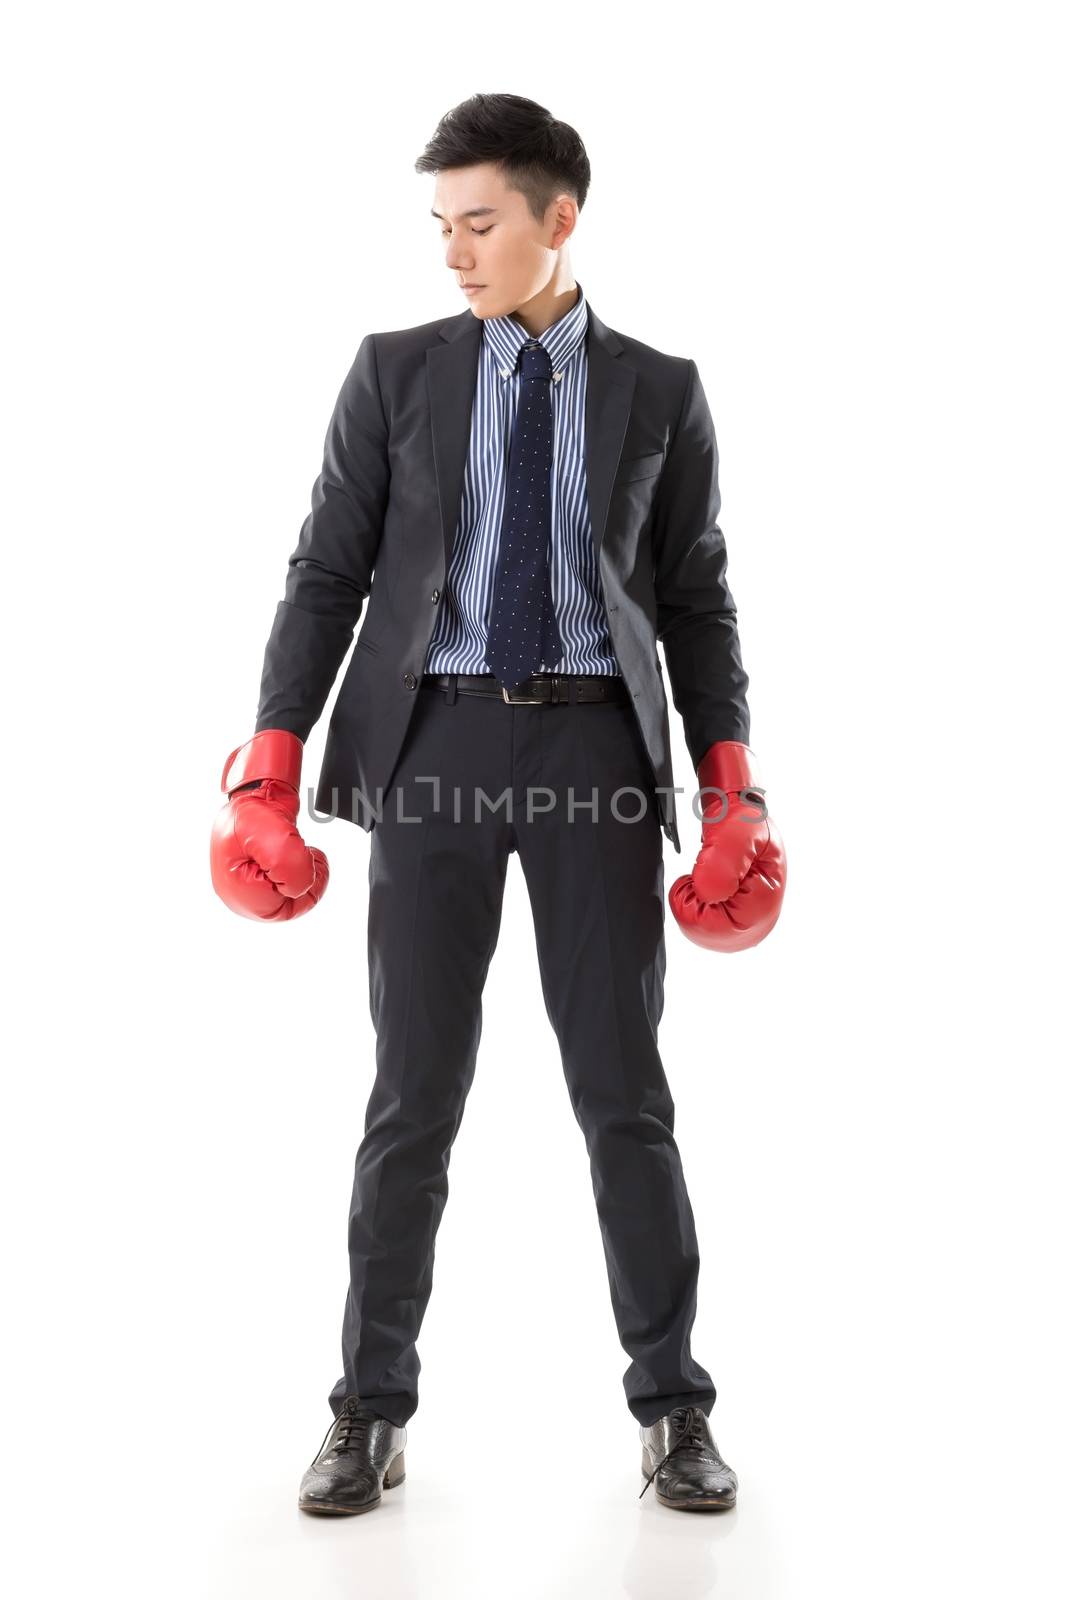 Asian businessman with boxing gloves, full length portrait isolated on white background. Concept about fight, struggle, against etc.